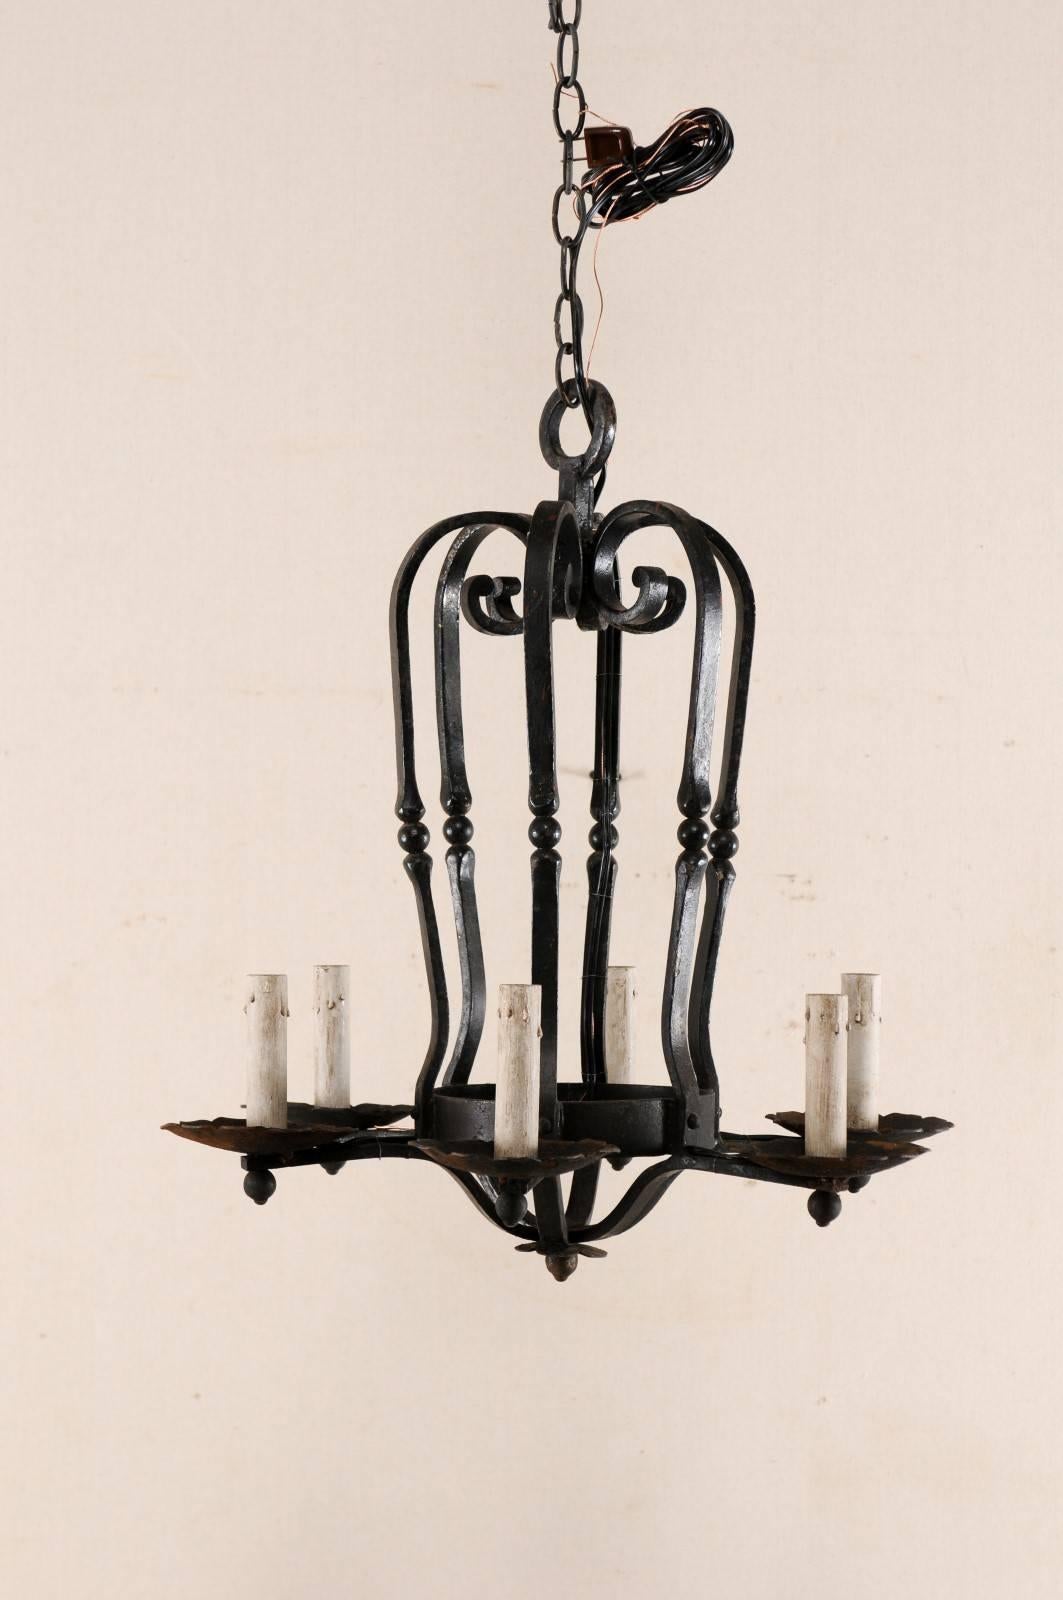 A vintage French six-light black iron chandelier. This French light fixture from the mid 20th century features an elegantly oblong caged center body with scrolled motif at it's top and iron accent beads decorating each post. There are six arms which